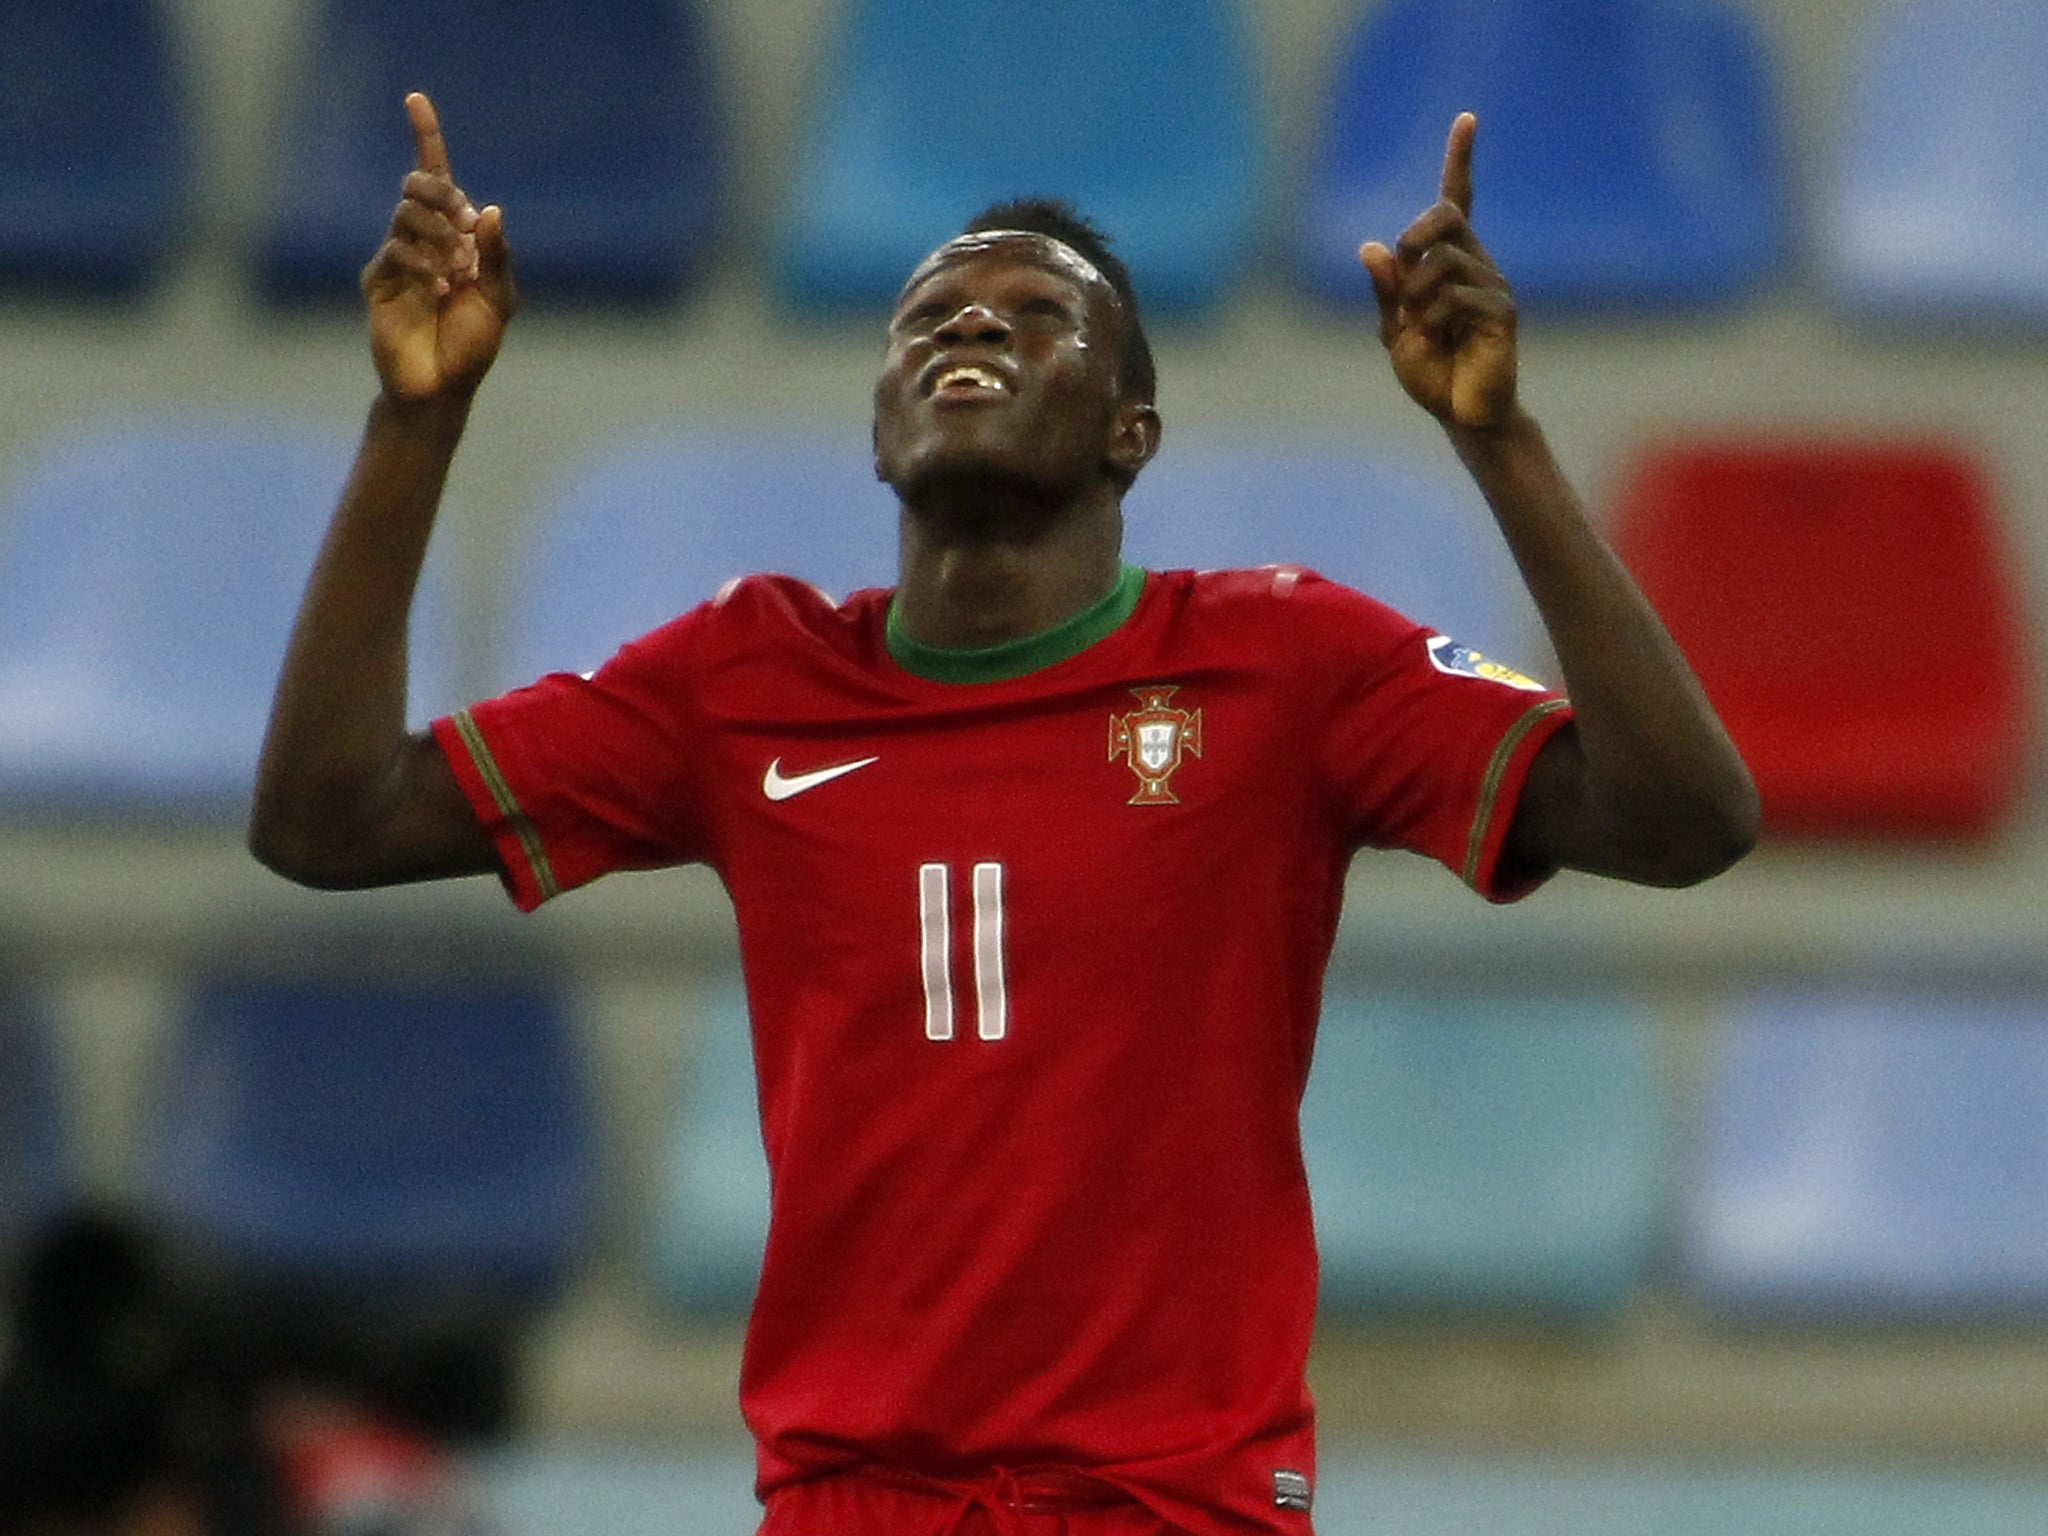 Sporting Lisbon winger Bruma in action for Portugal Under-20's in the recent U-20's World Cup